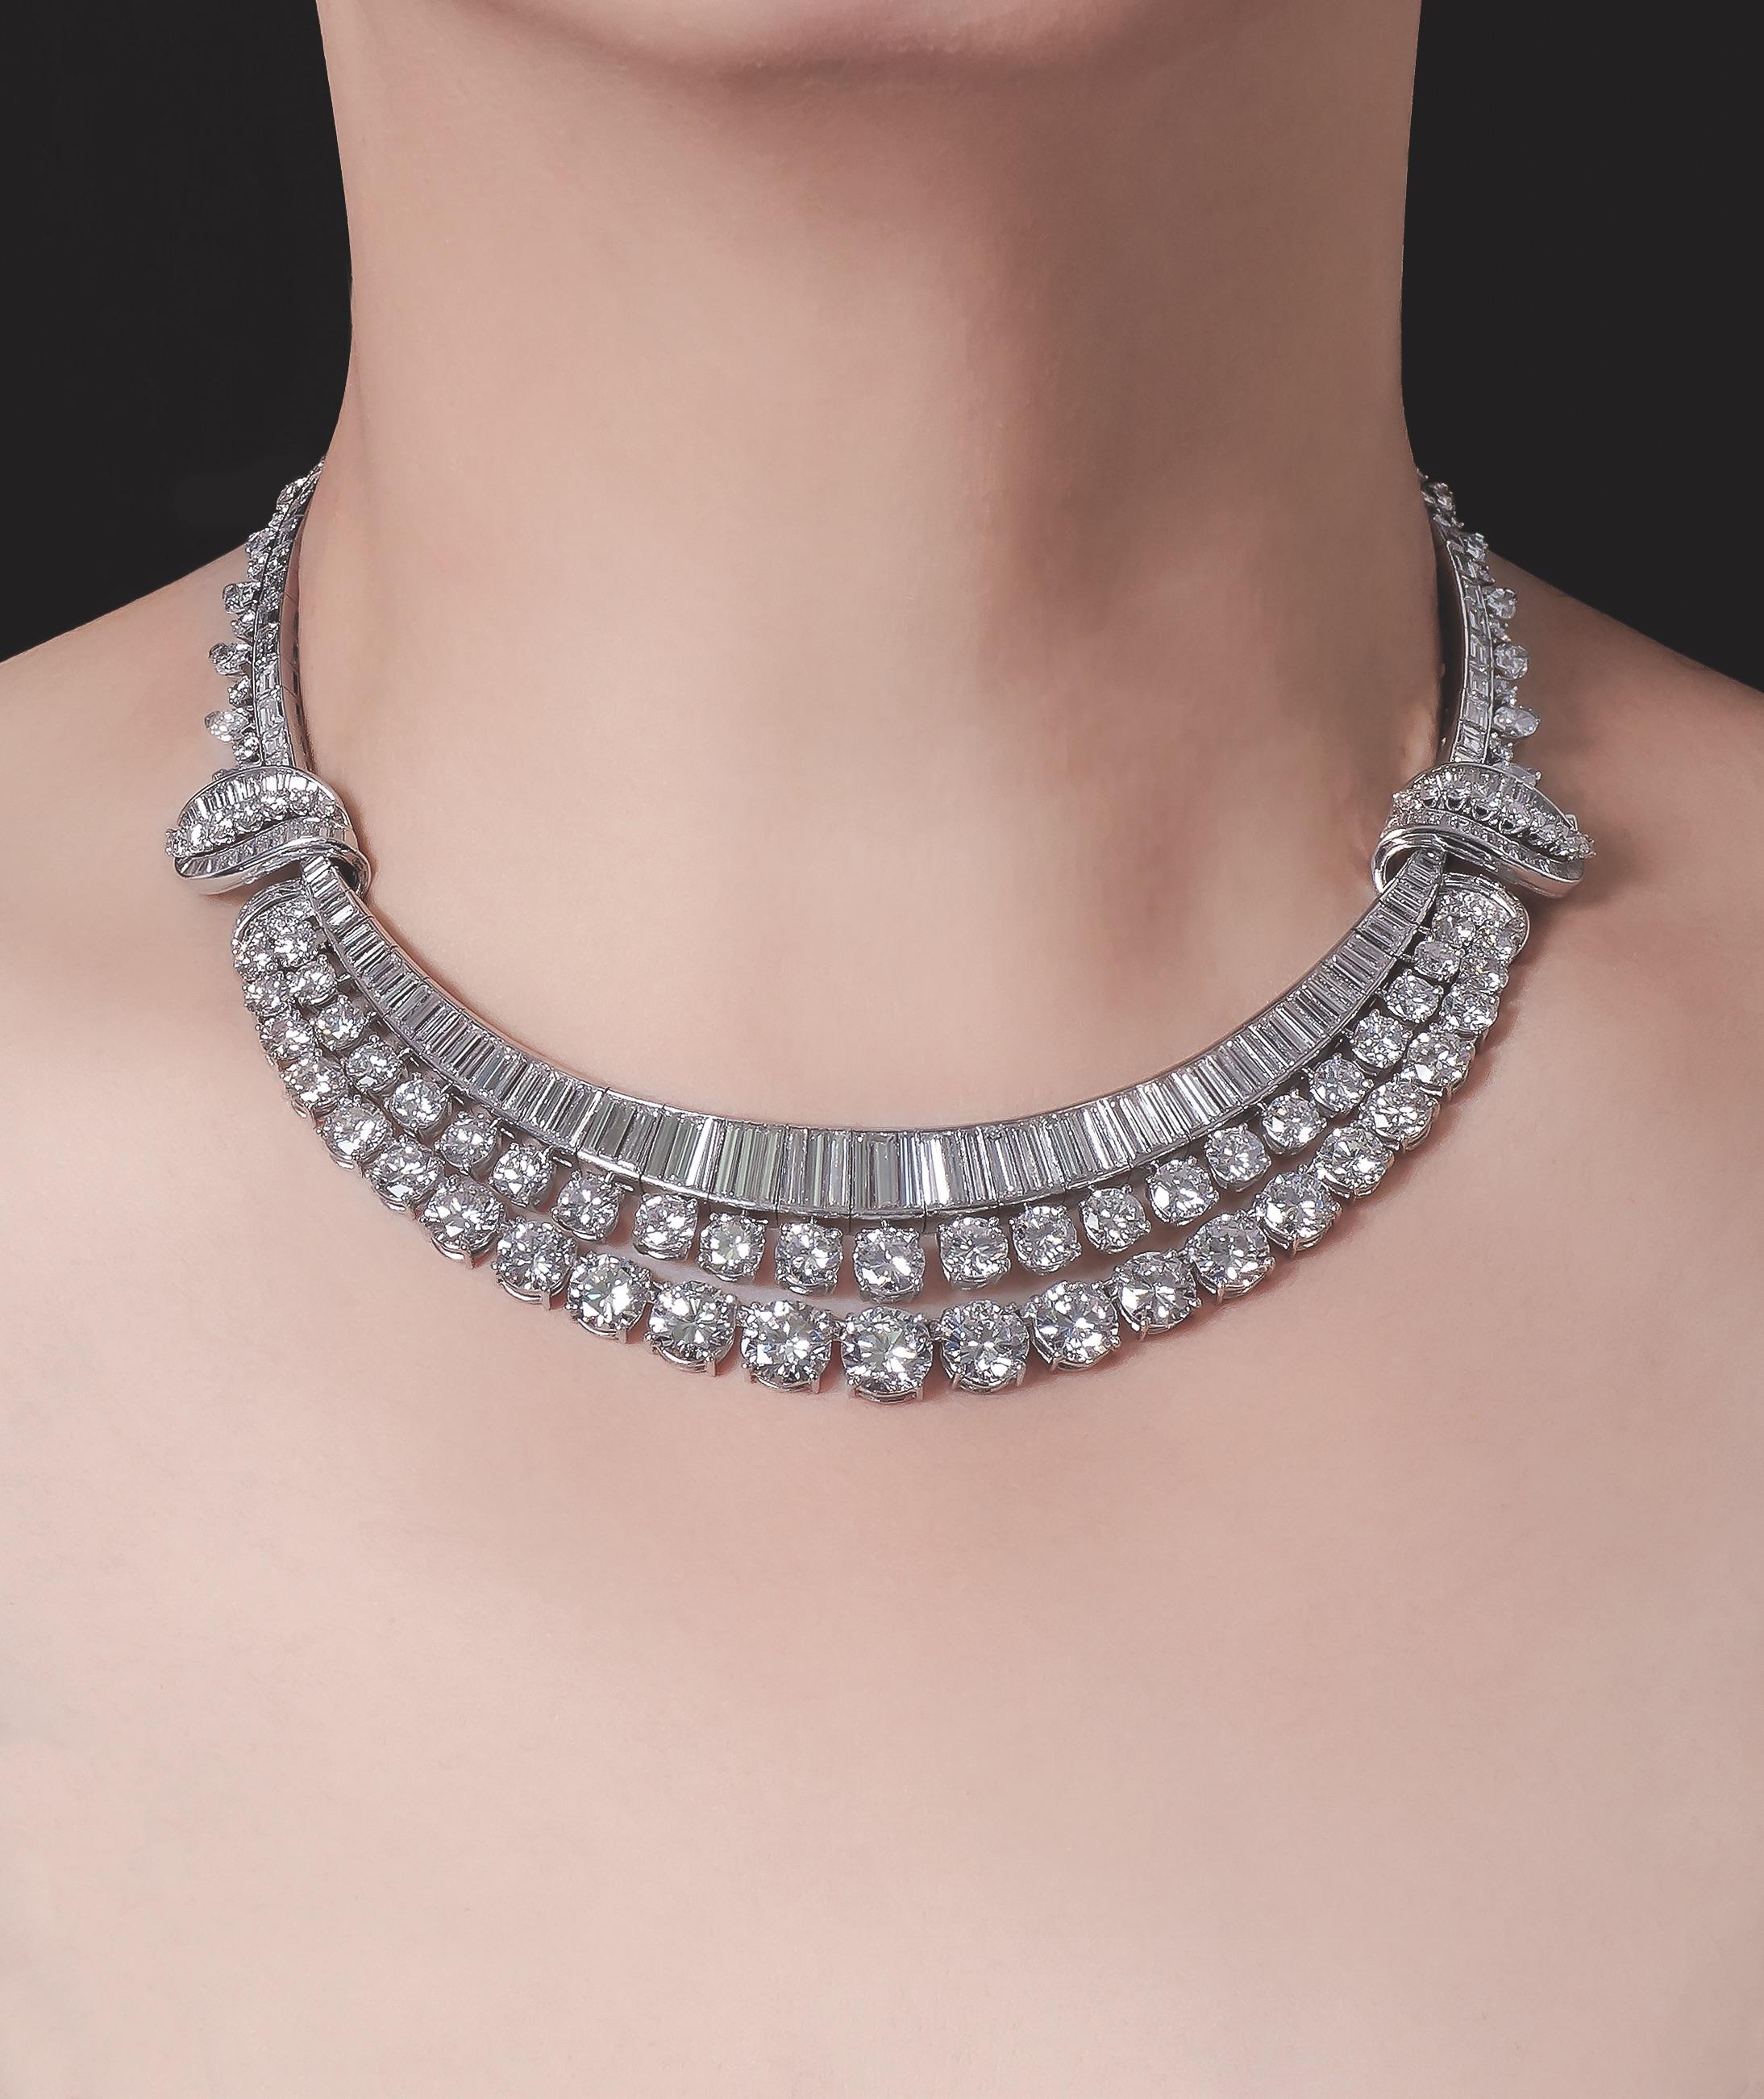 Brilliance Jewels, Miami
Questions? Call Us Anytime!
786,482,8100

A unique necklace in round, baguette, marquees and pear-cut diamonds. It bares a striking resemblance to the famous Van Cleef & Arpels necklace specially created for H.R. H. Princess